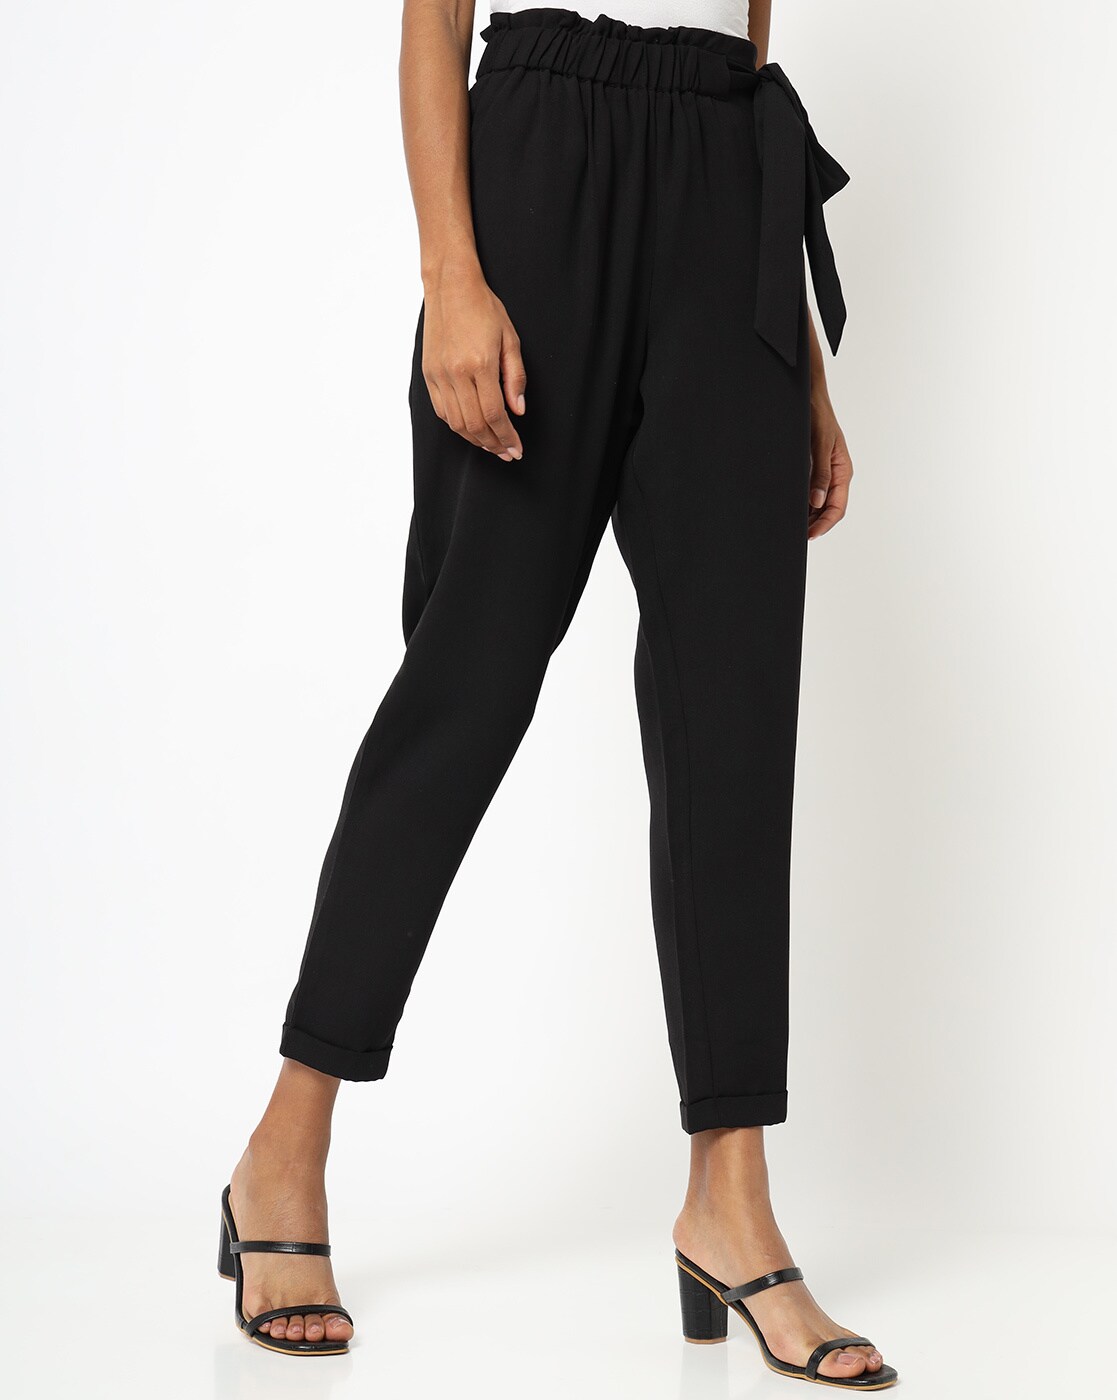 Buy Women Classics Paperbag Waist Trousers  Black  Trends Online India   FabAlley